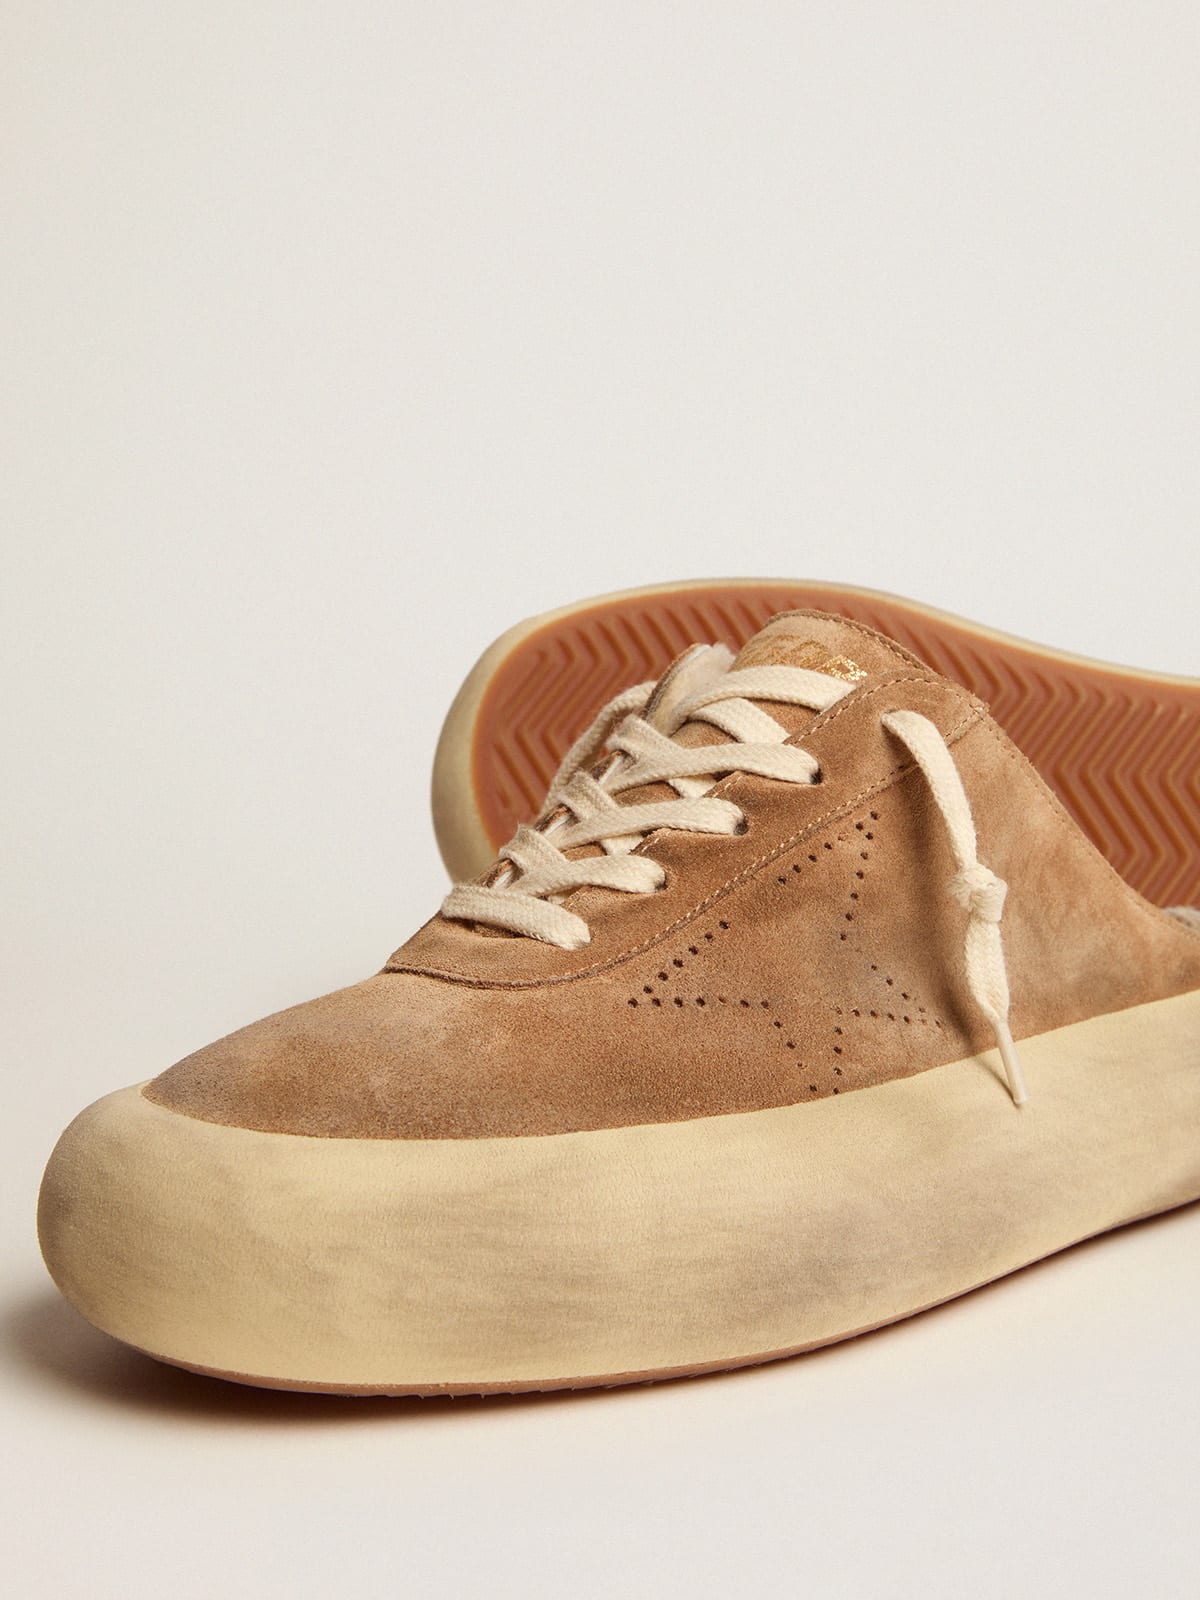 Golden Goose - Women's Space-Star Sabot shoes in tobacco-colored suede with shearling lining in 